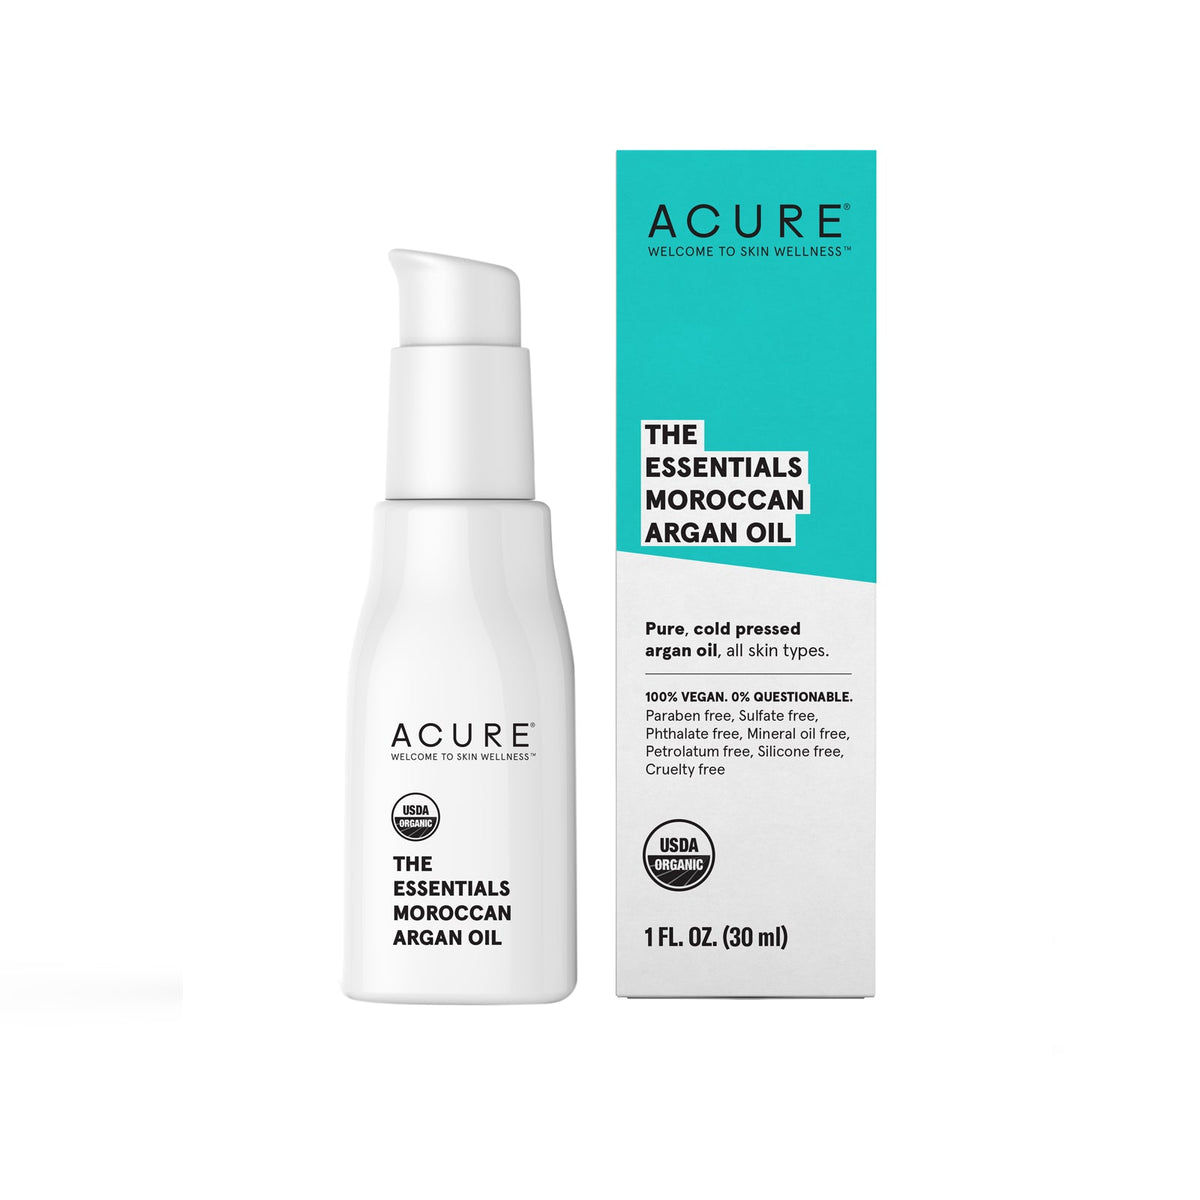 ACURE - The Essentials Moroccan Argan Oil - by Acure |ProCare Outlet|